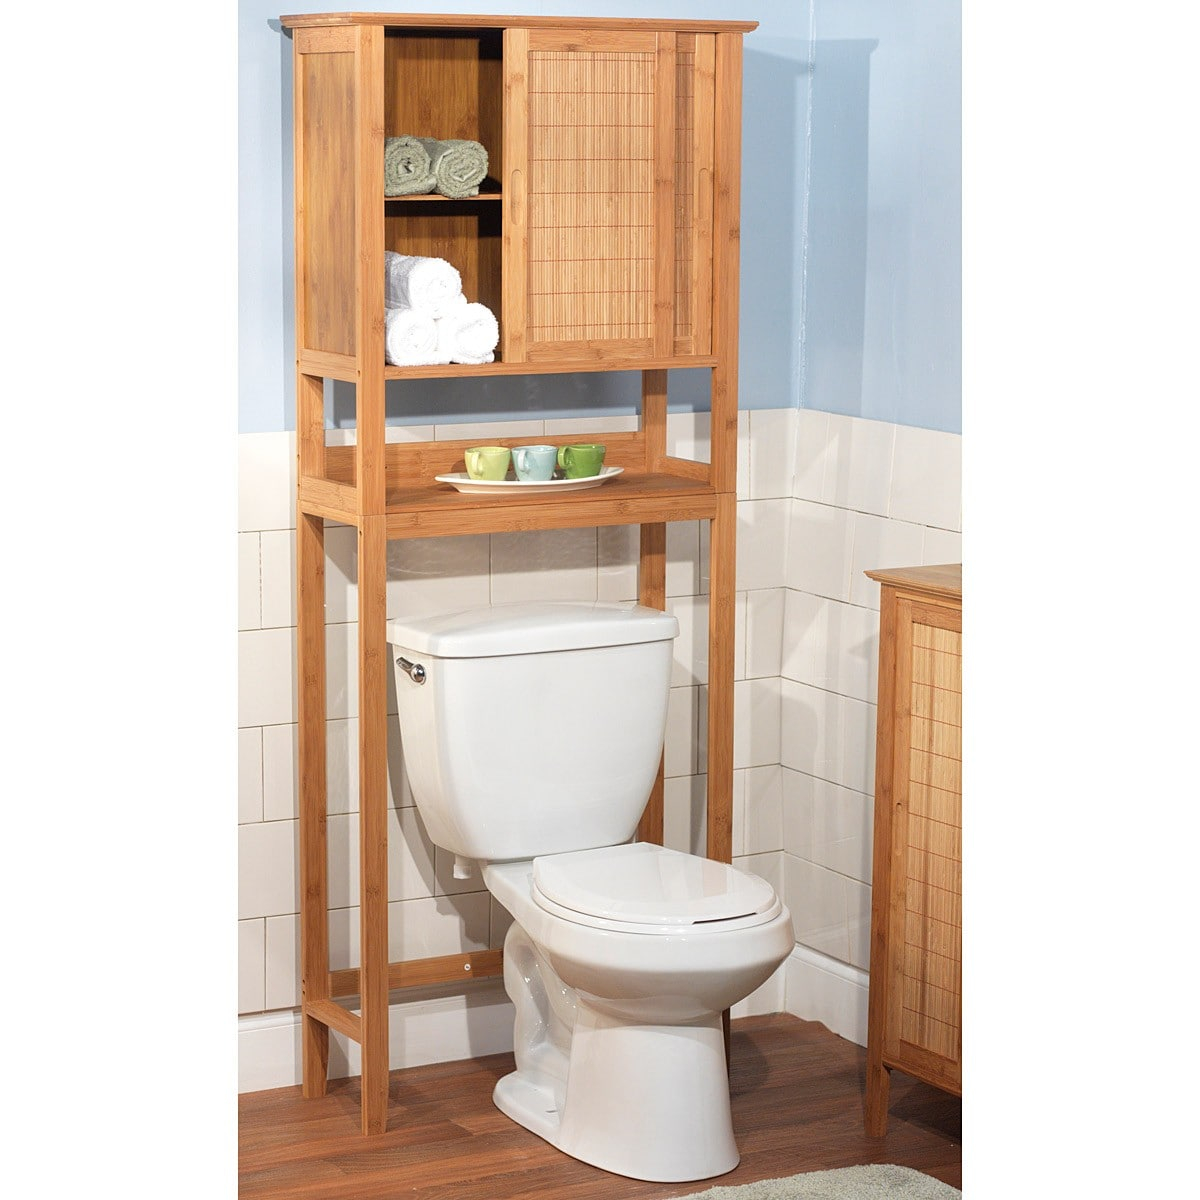 Bamboo Over The Toilet Space Saver Walmart throughout sizing 1200 X 1200